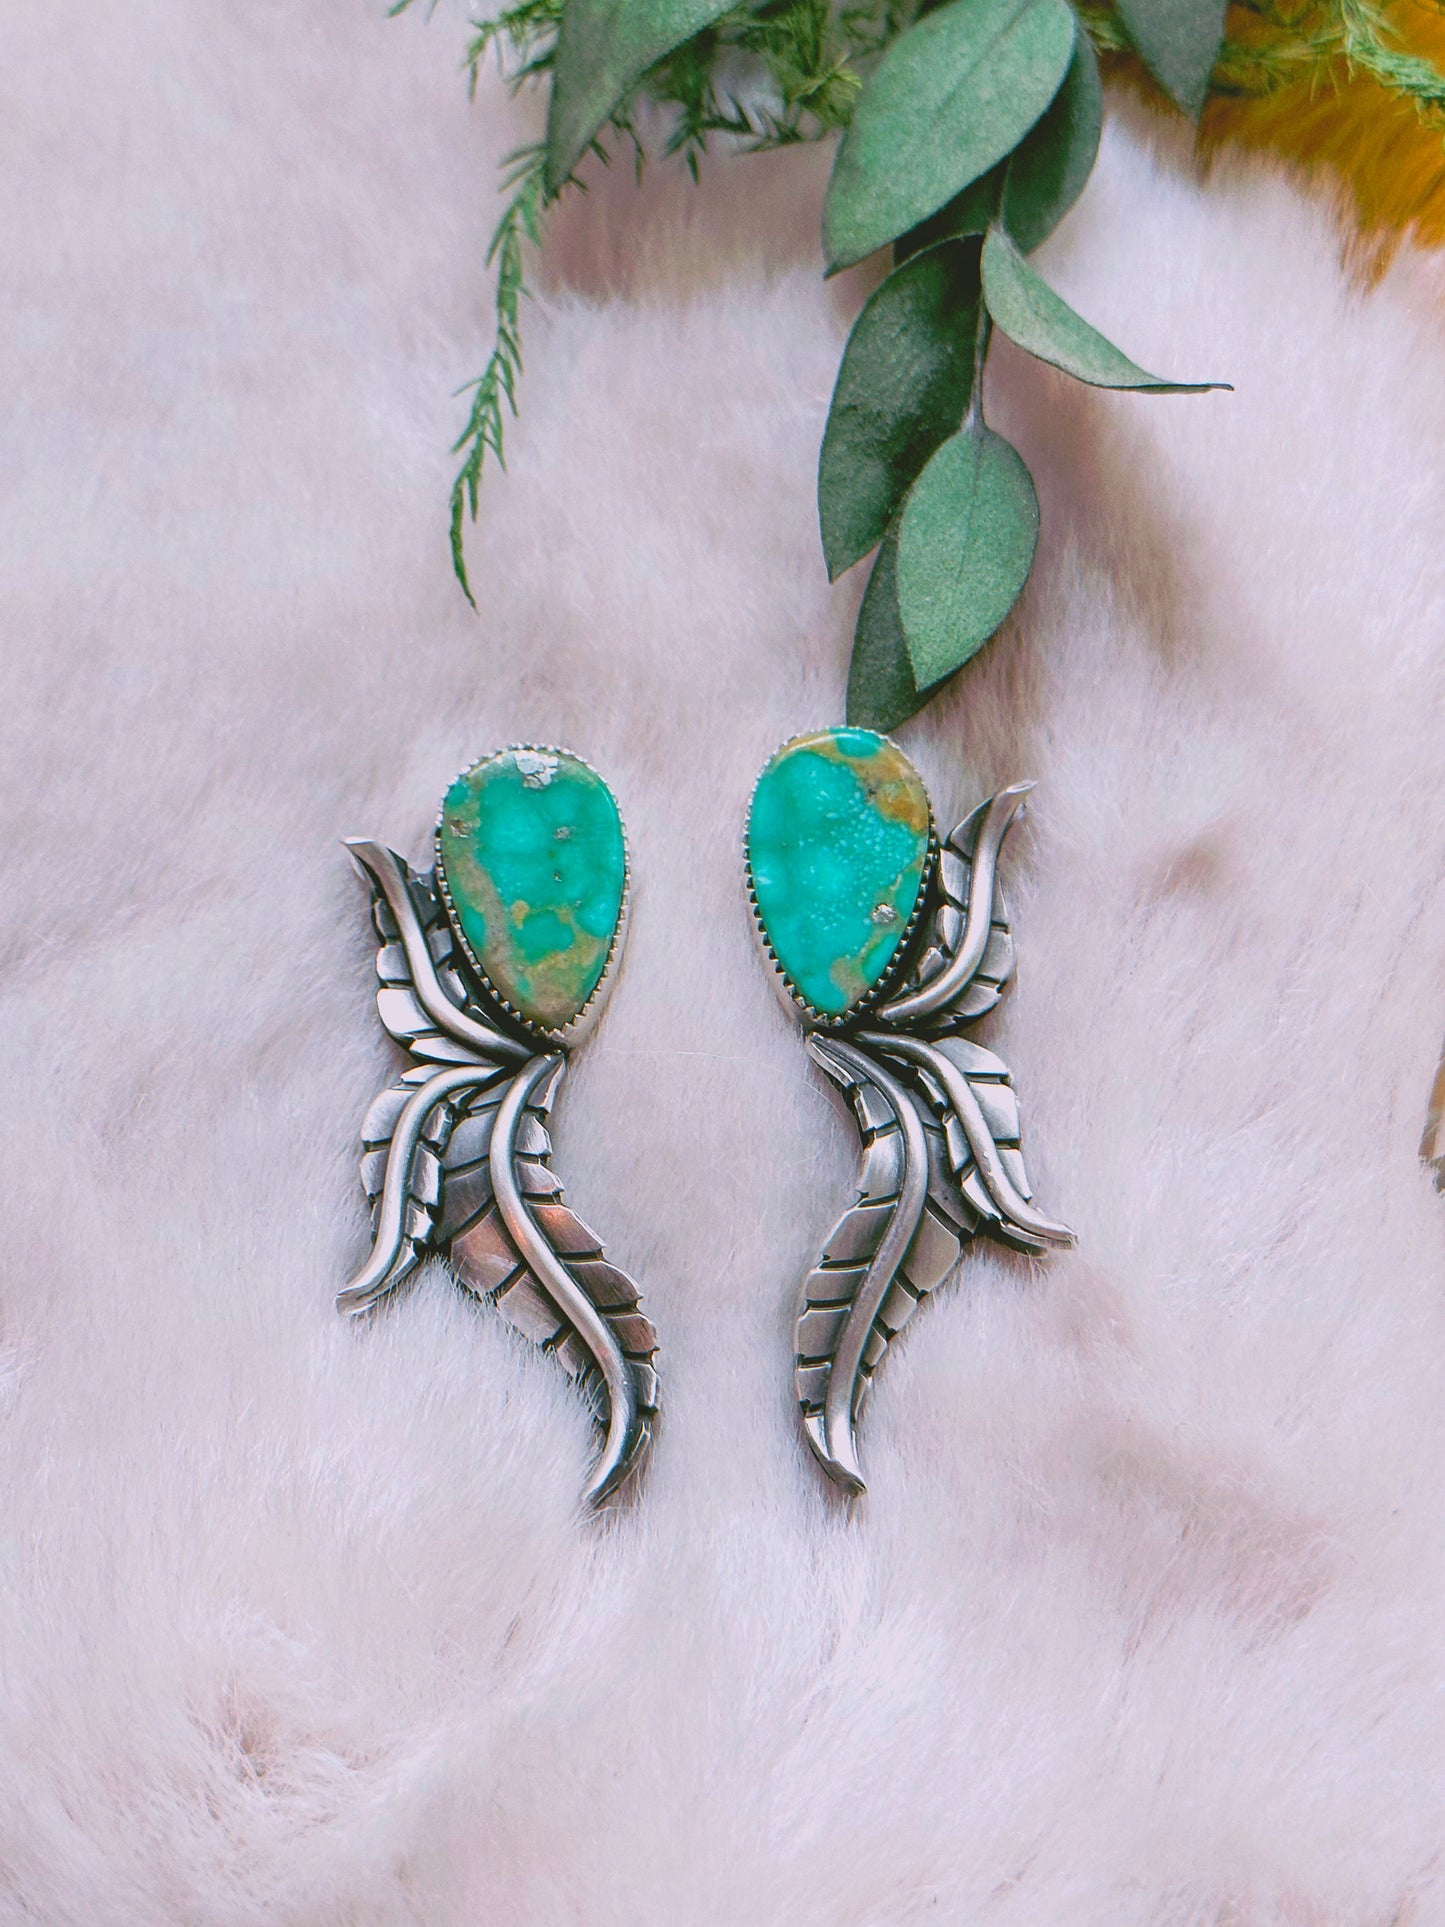 Pre-order botanical earrings with green Campitos turquoise for Melanie ONLY